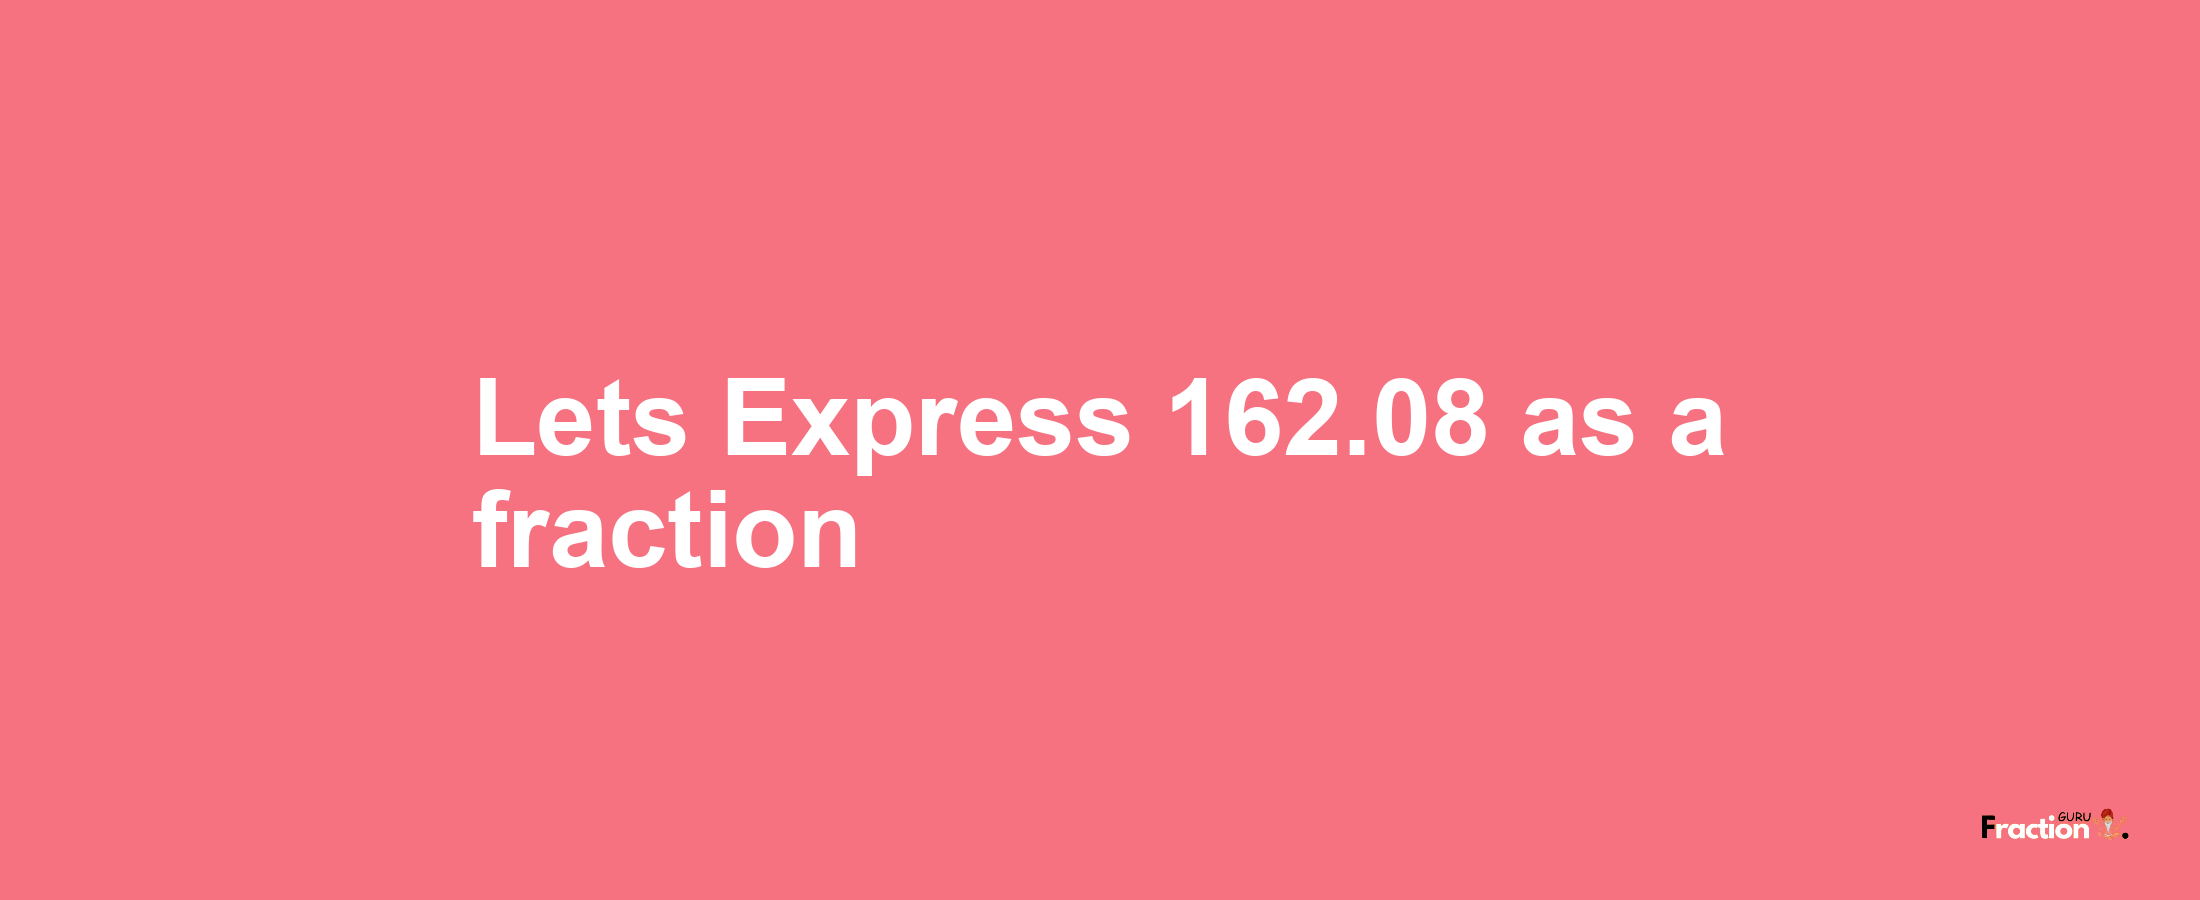 Lets Express 162.08 as afraction